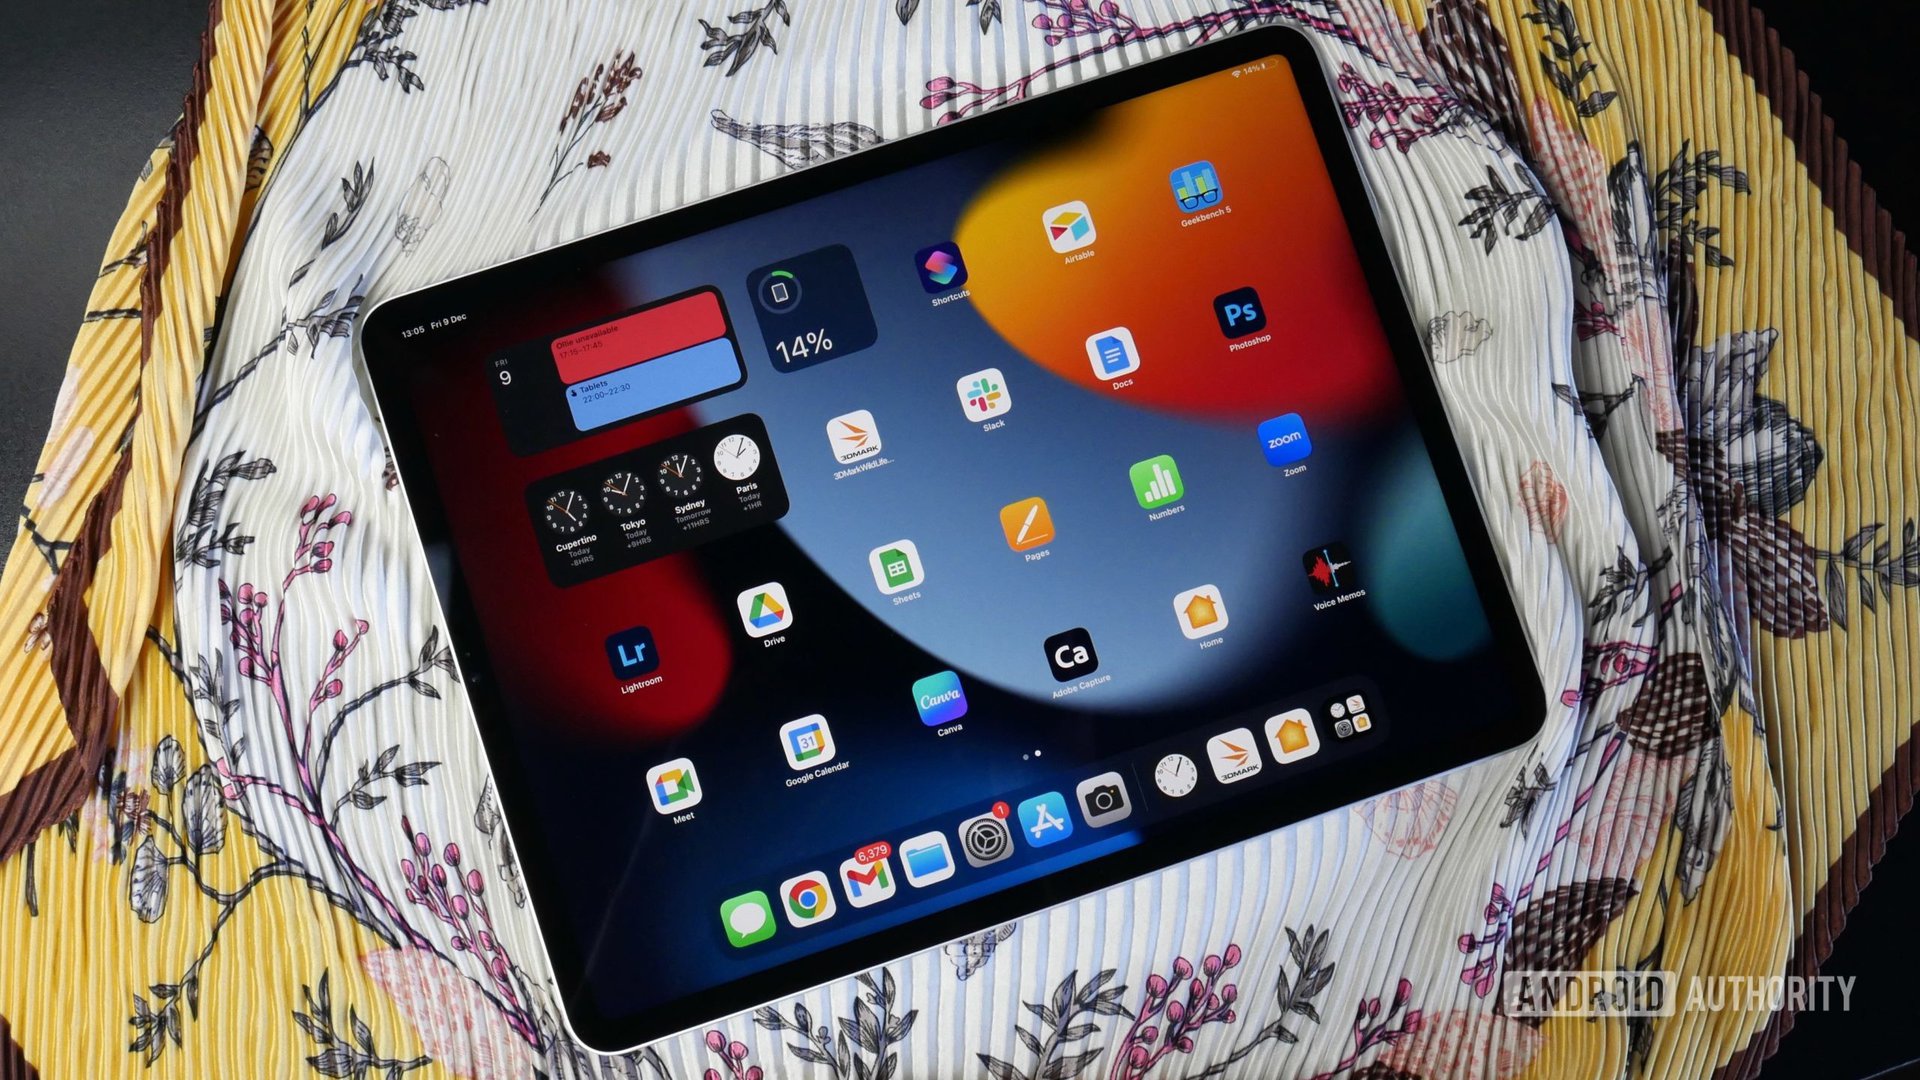 https://www.androidauthority.com/wp-content/uploads/2022/12/Apple-iPad-Pro-M2-2022-display-2-scaled.jpeg